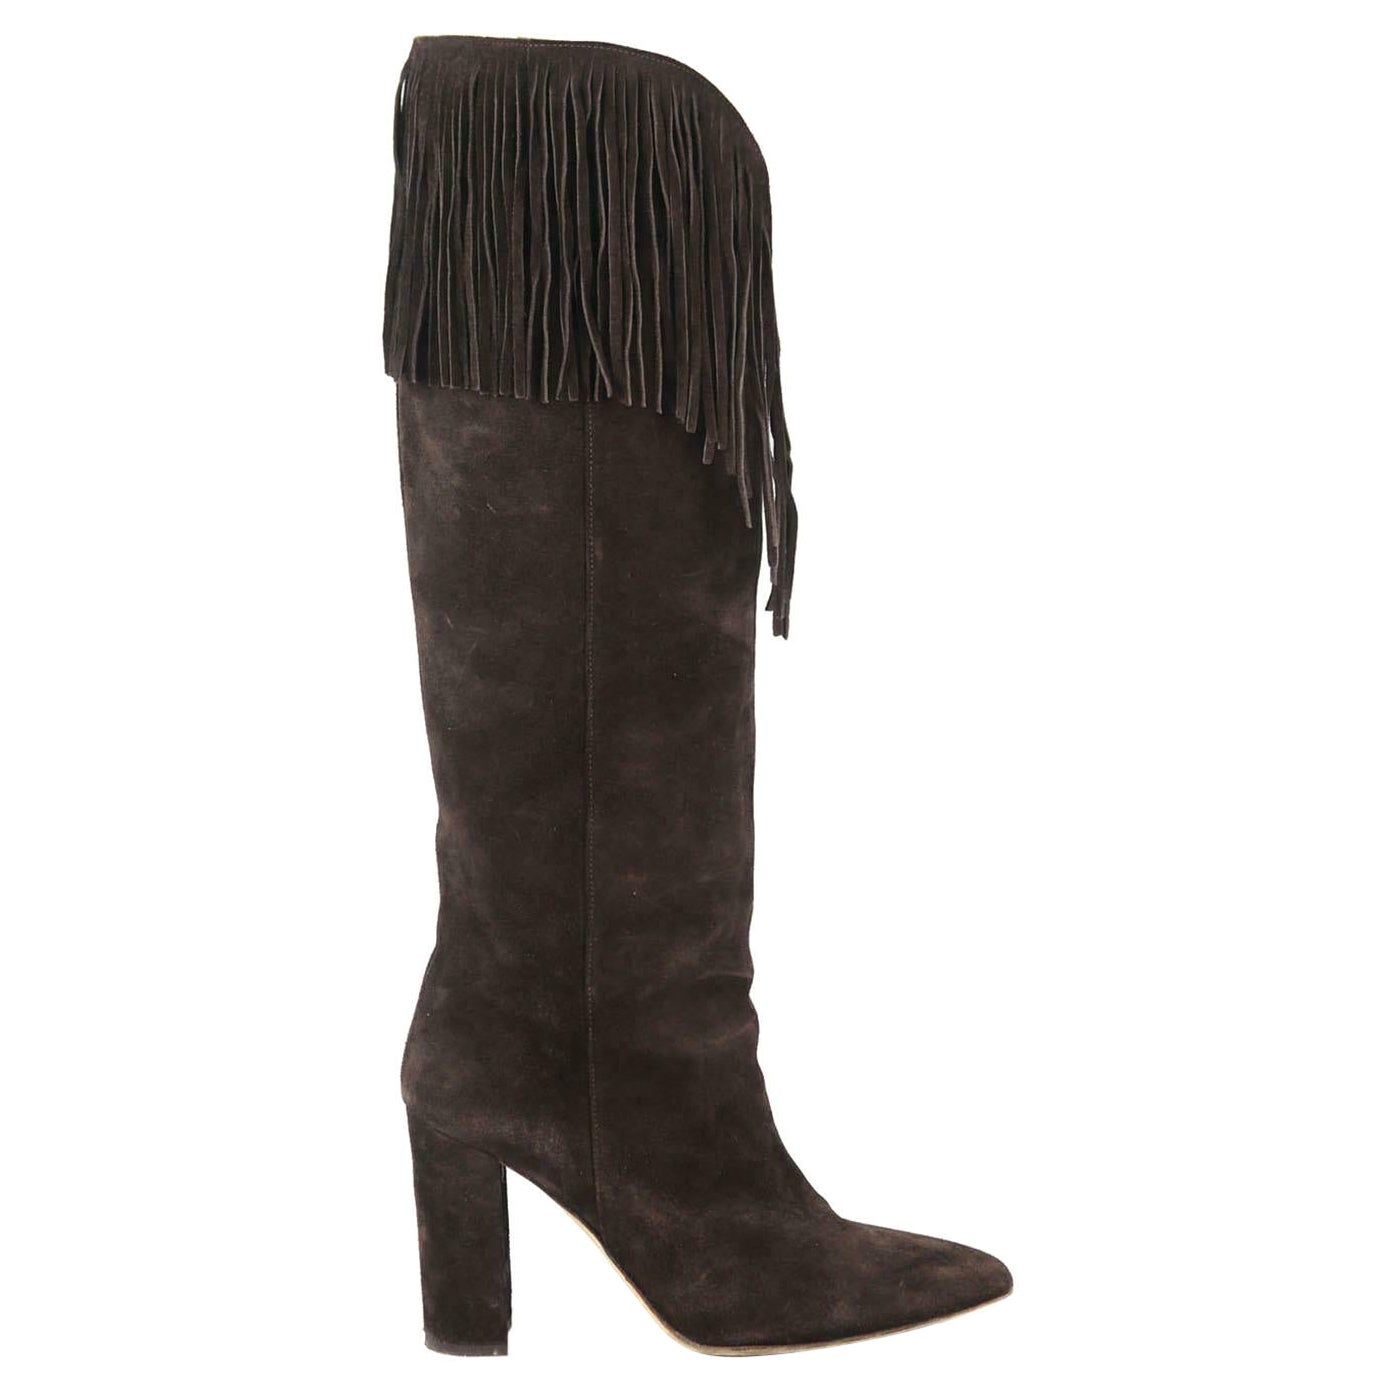 Paris Texas Snake Effect Leather Knee High Boots